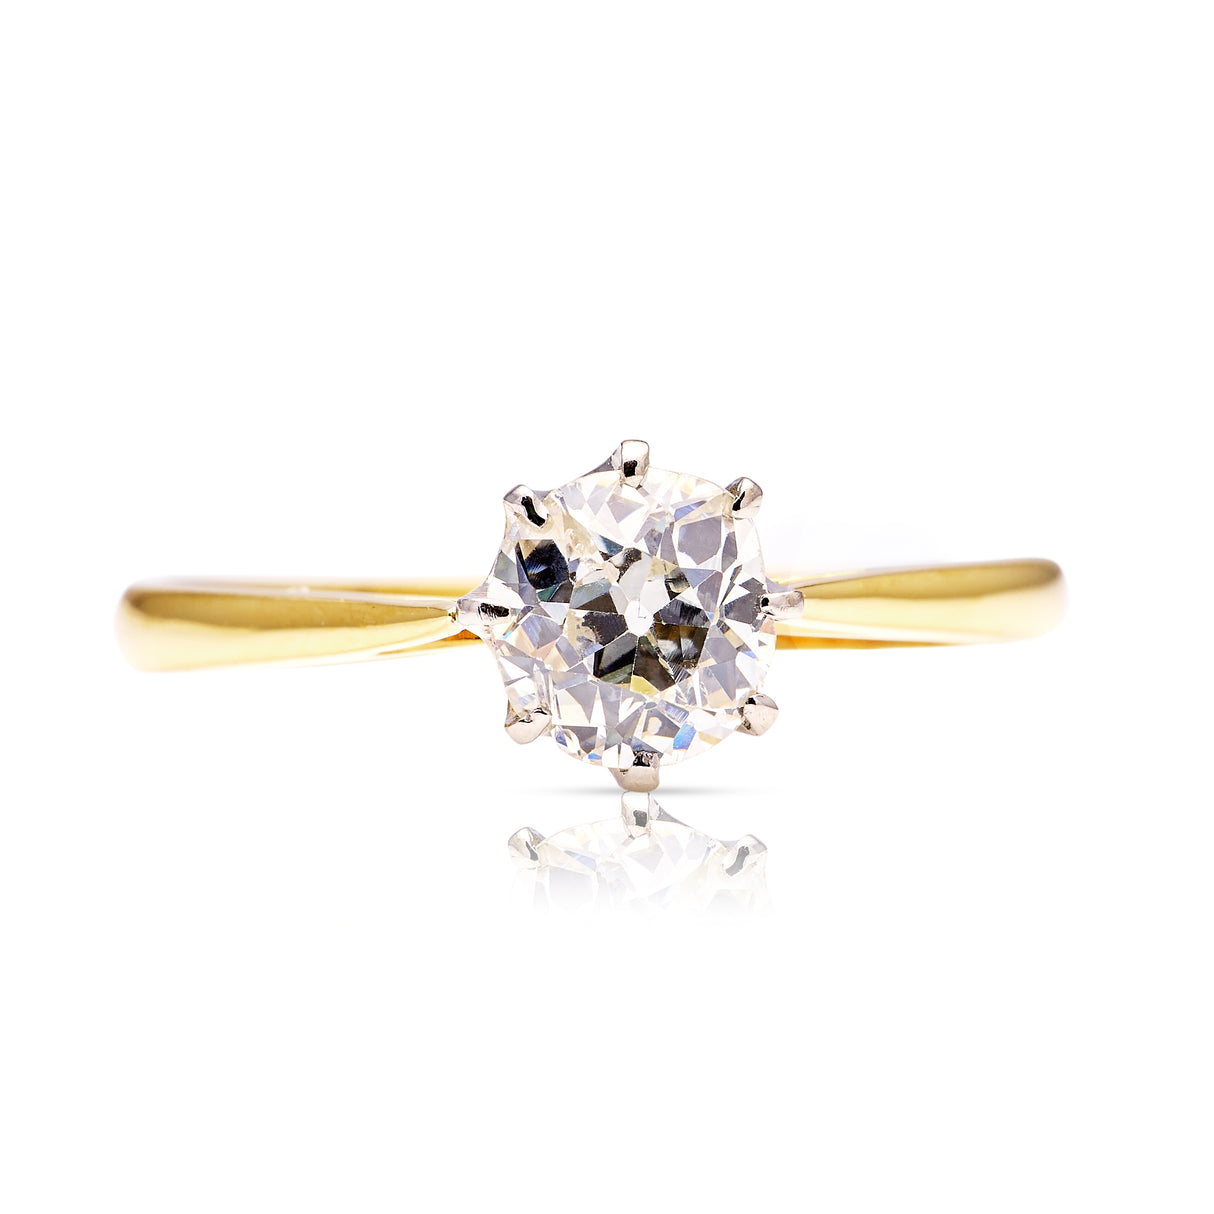 Antique, Edwardian solitaire diamond engagement ring, 18ct yellow gold and platinum